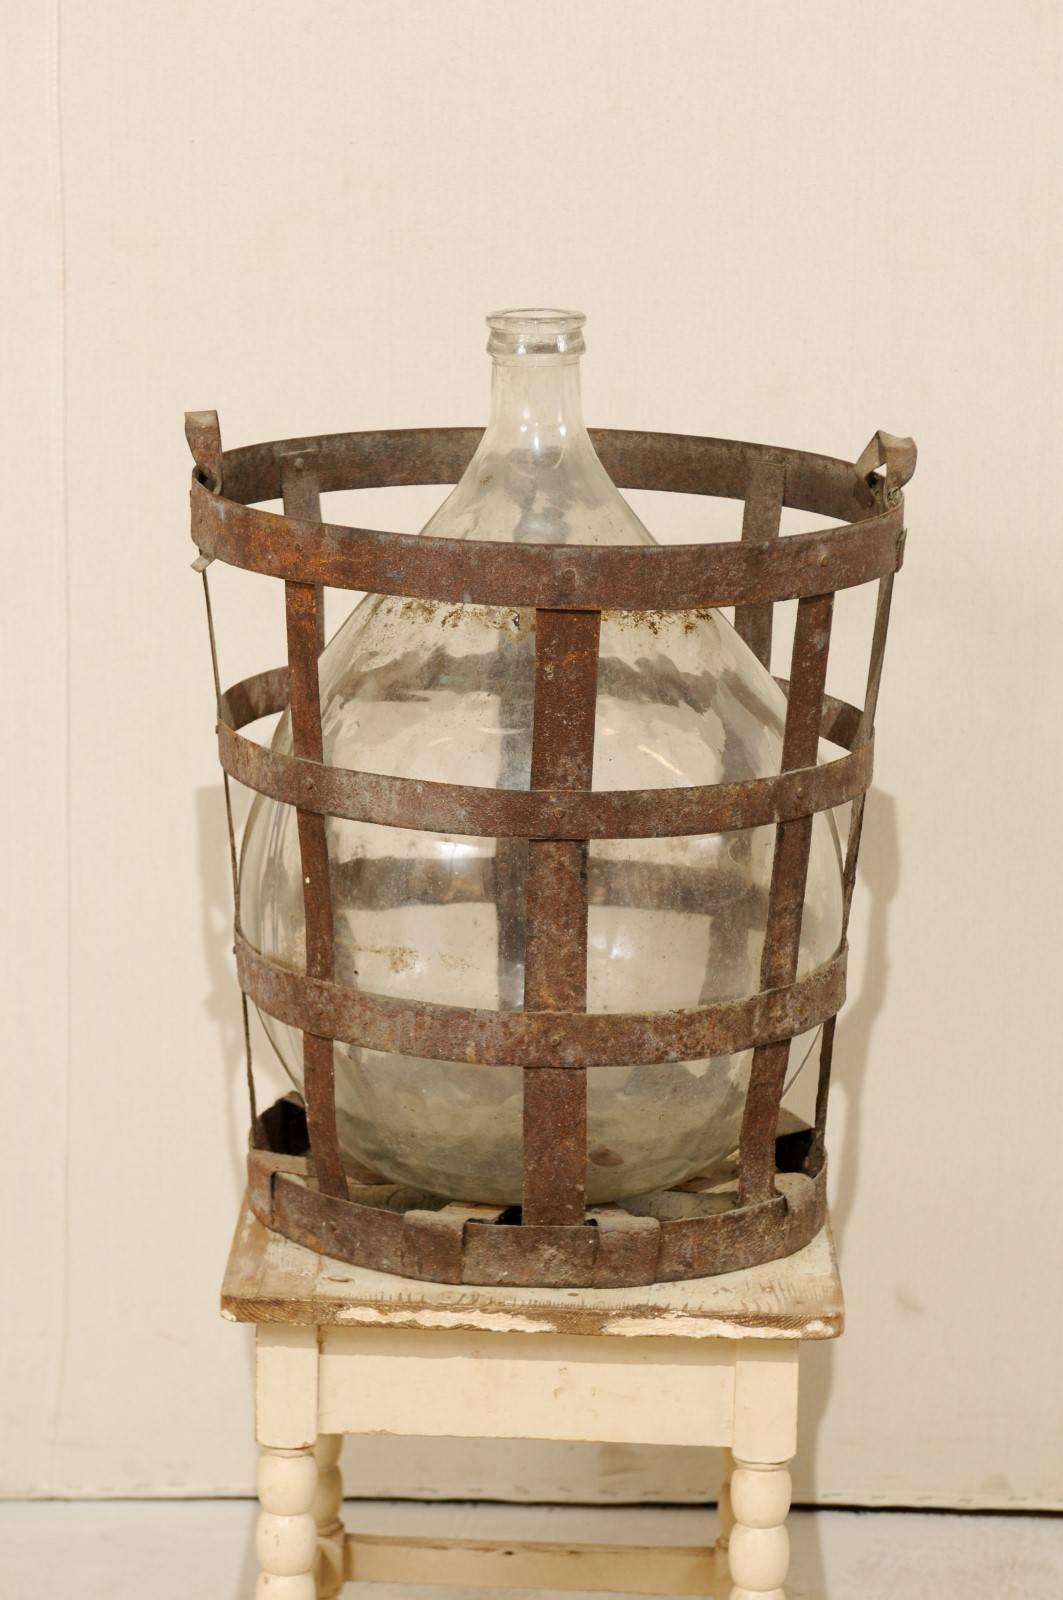 A Mid-Century French vintner iron basket with demijohn wine bottle. This is a French vintner iron-strap, two handle basket containing a large sized, clear, demijohn wine bottle. The basket is nicely aged. This French vintner basket and demijohn